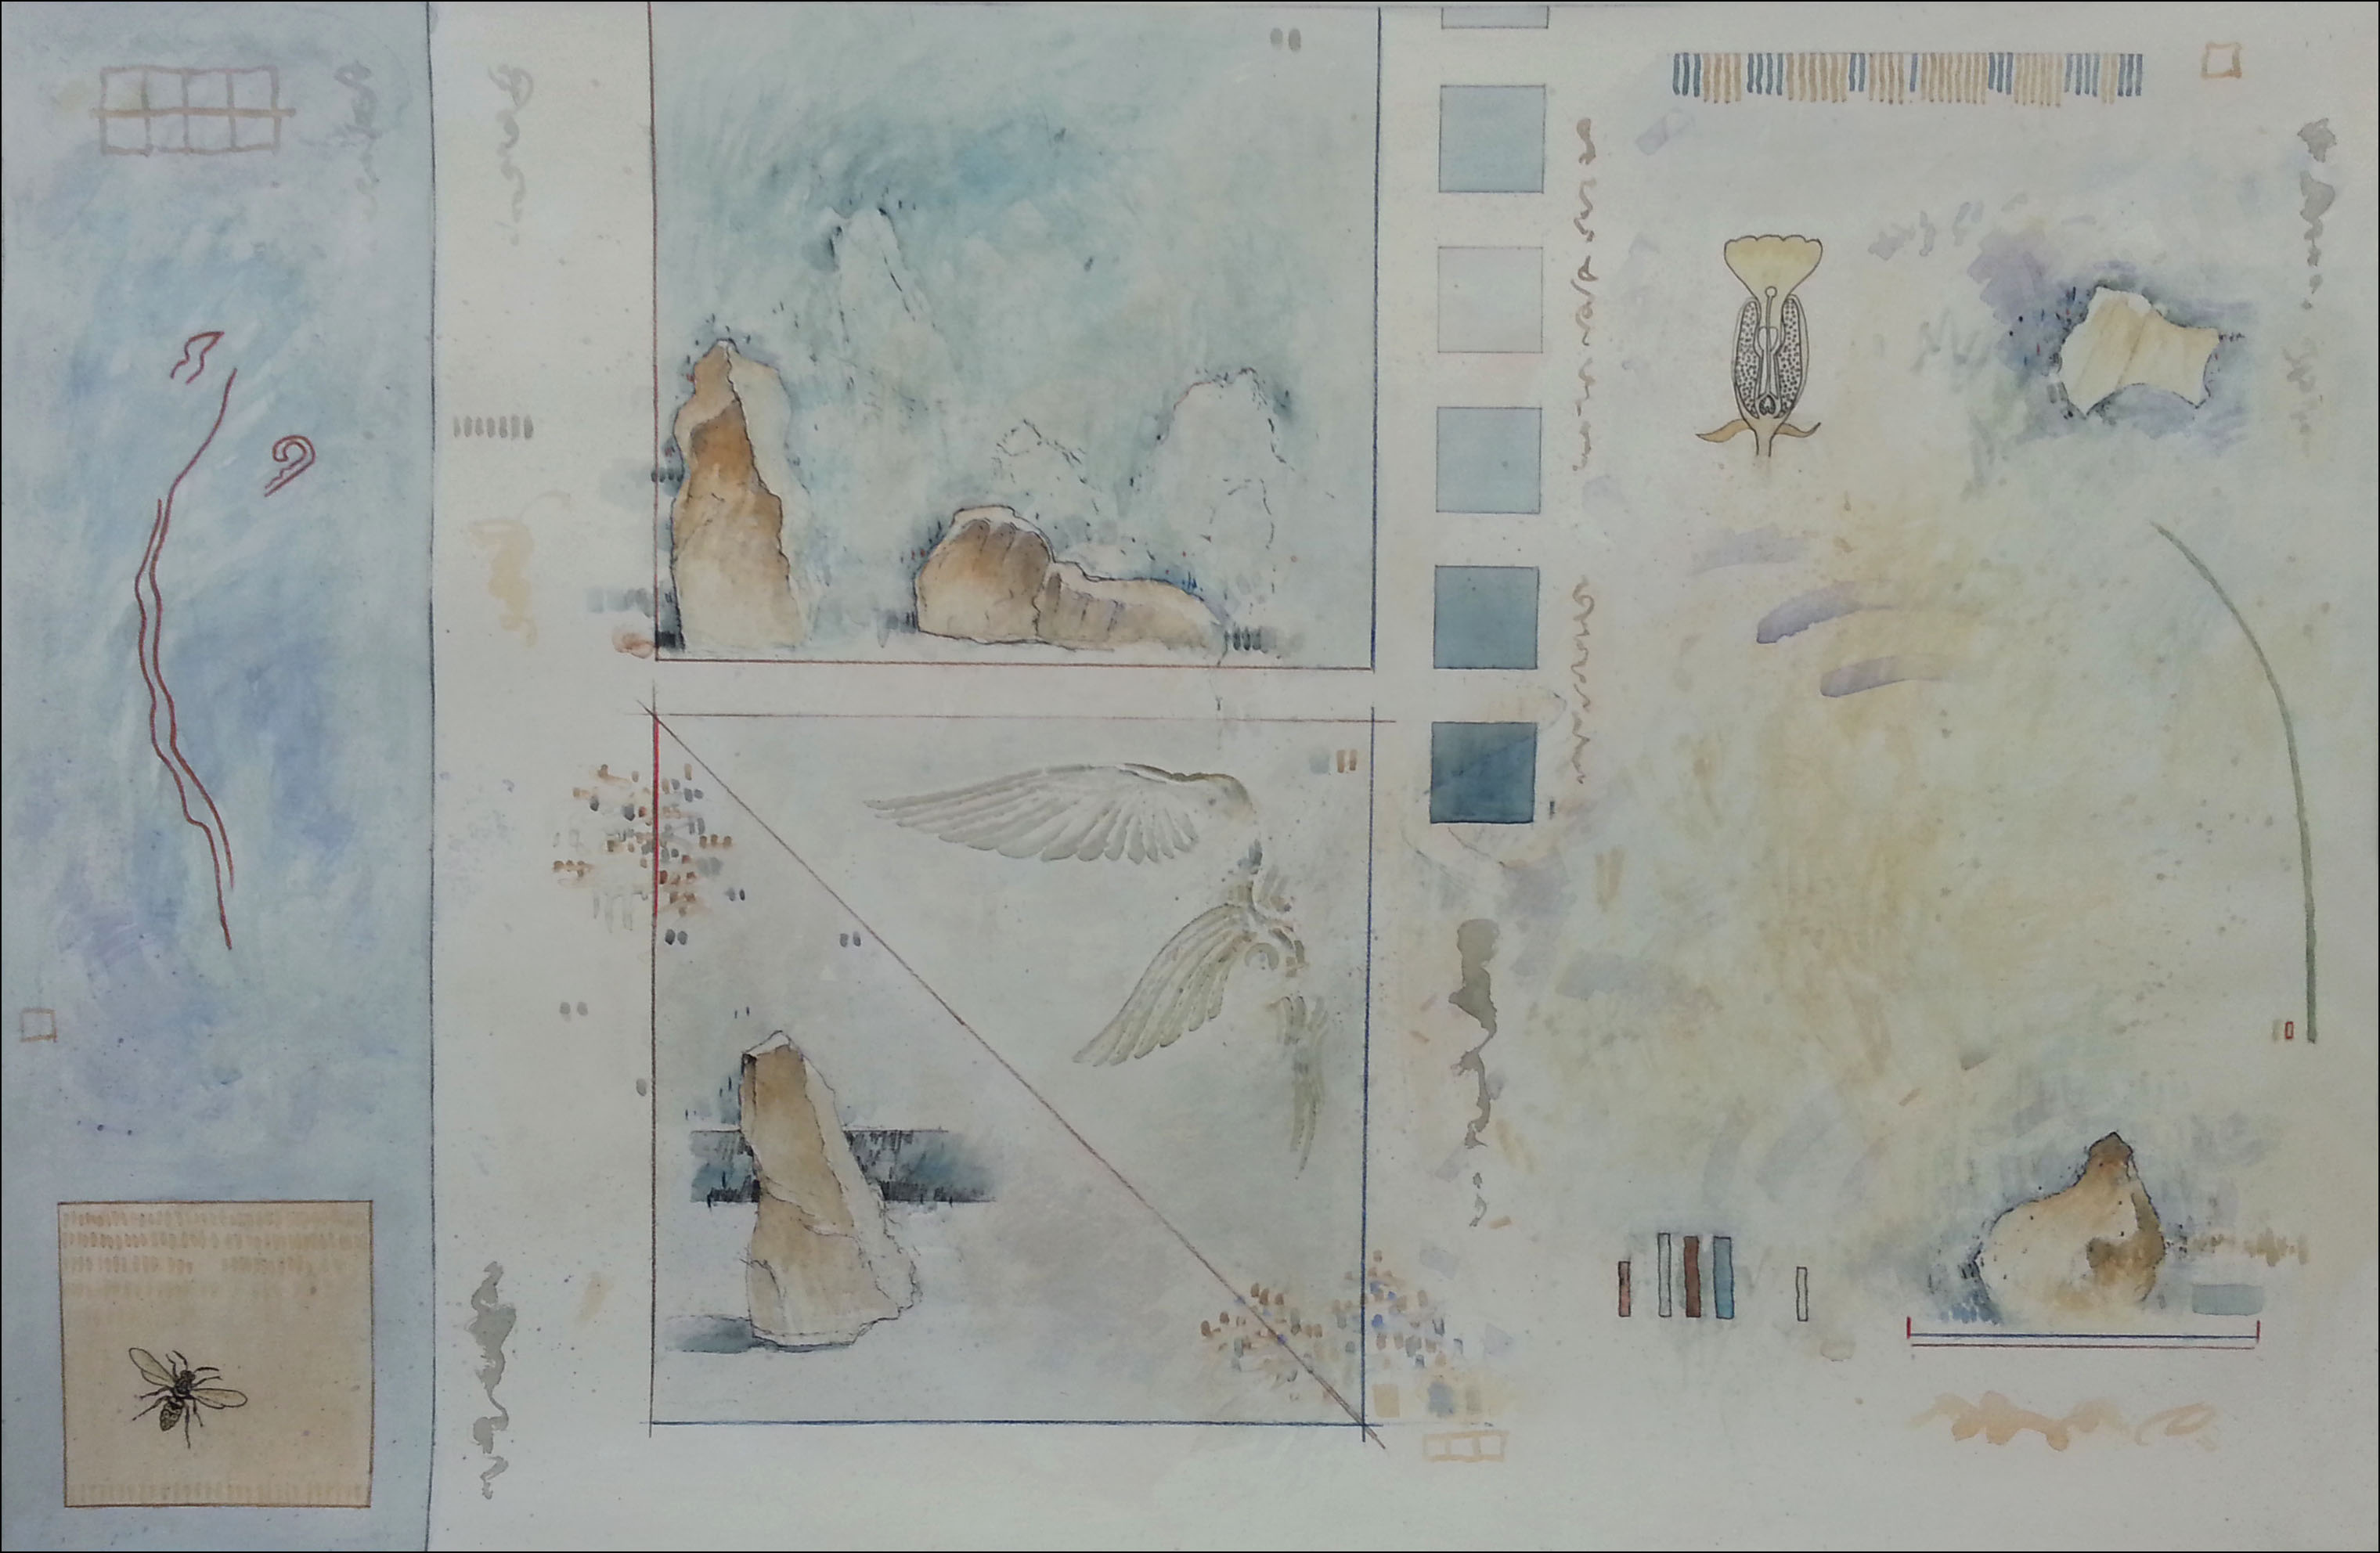 Stones, wings & signs July-Nov 2015 33x21 watercolour & graphite